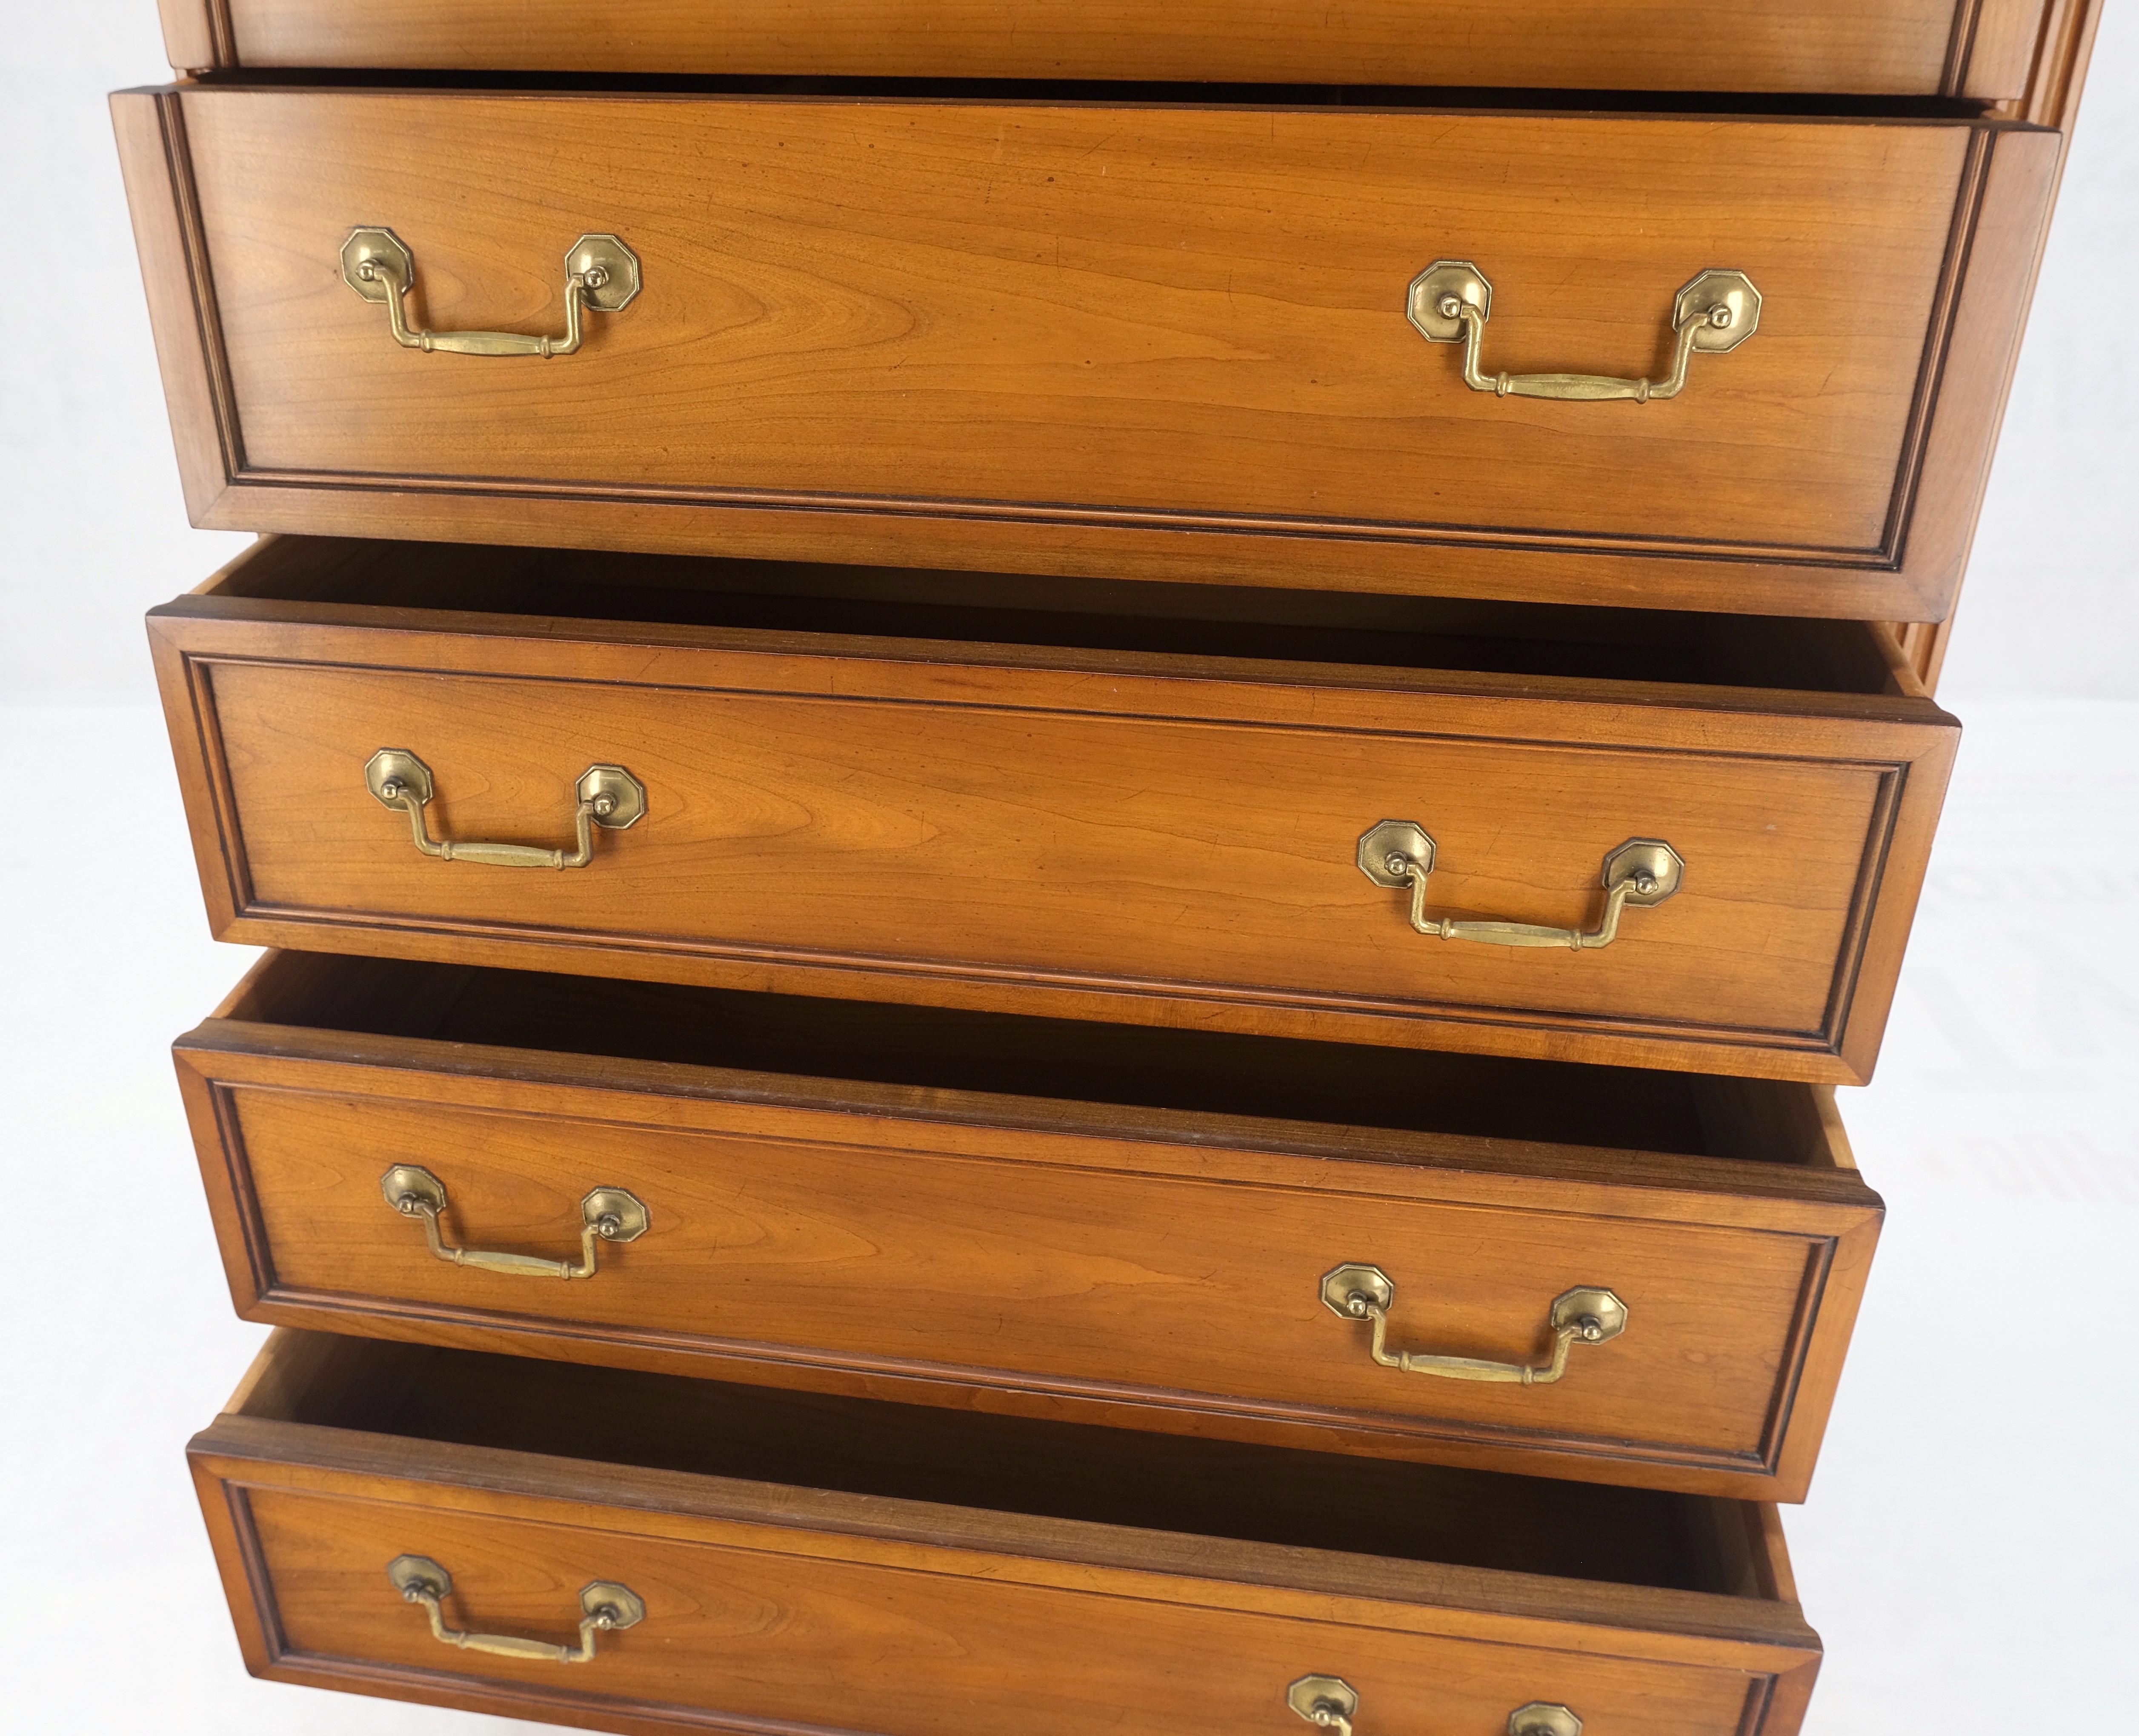 Kindel 7 Drawers Fruitwood Heavy Brass Drop Pulls High Chest Tall Dresser Mint! In Good Condition For Sale In Rockaway, NJ